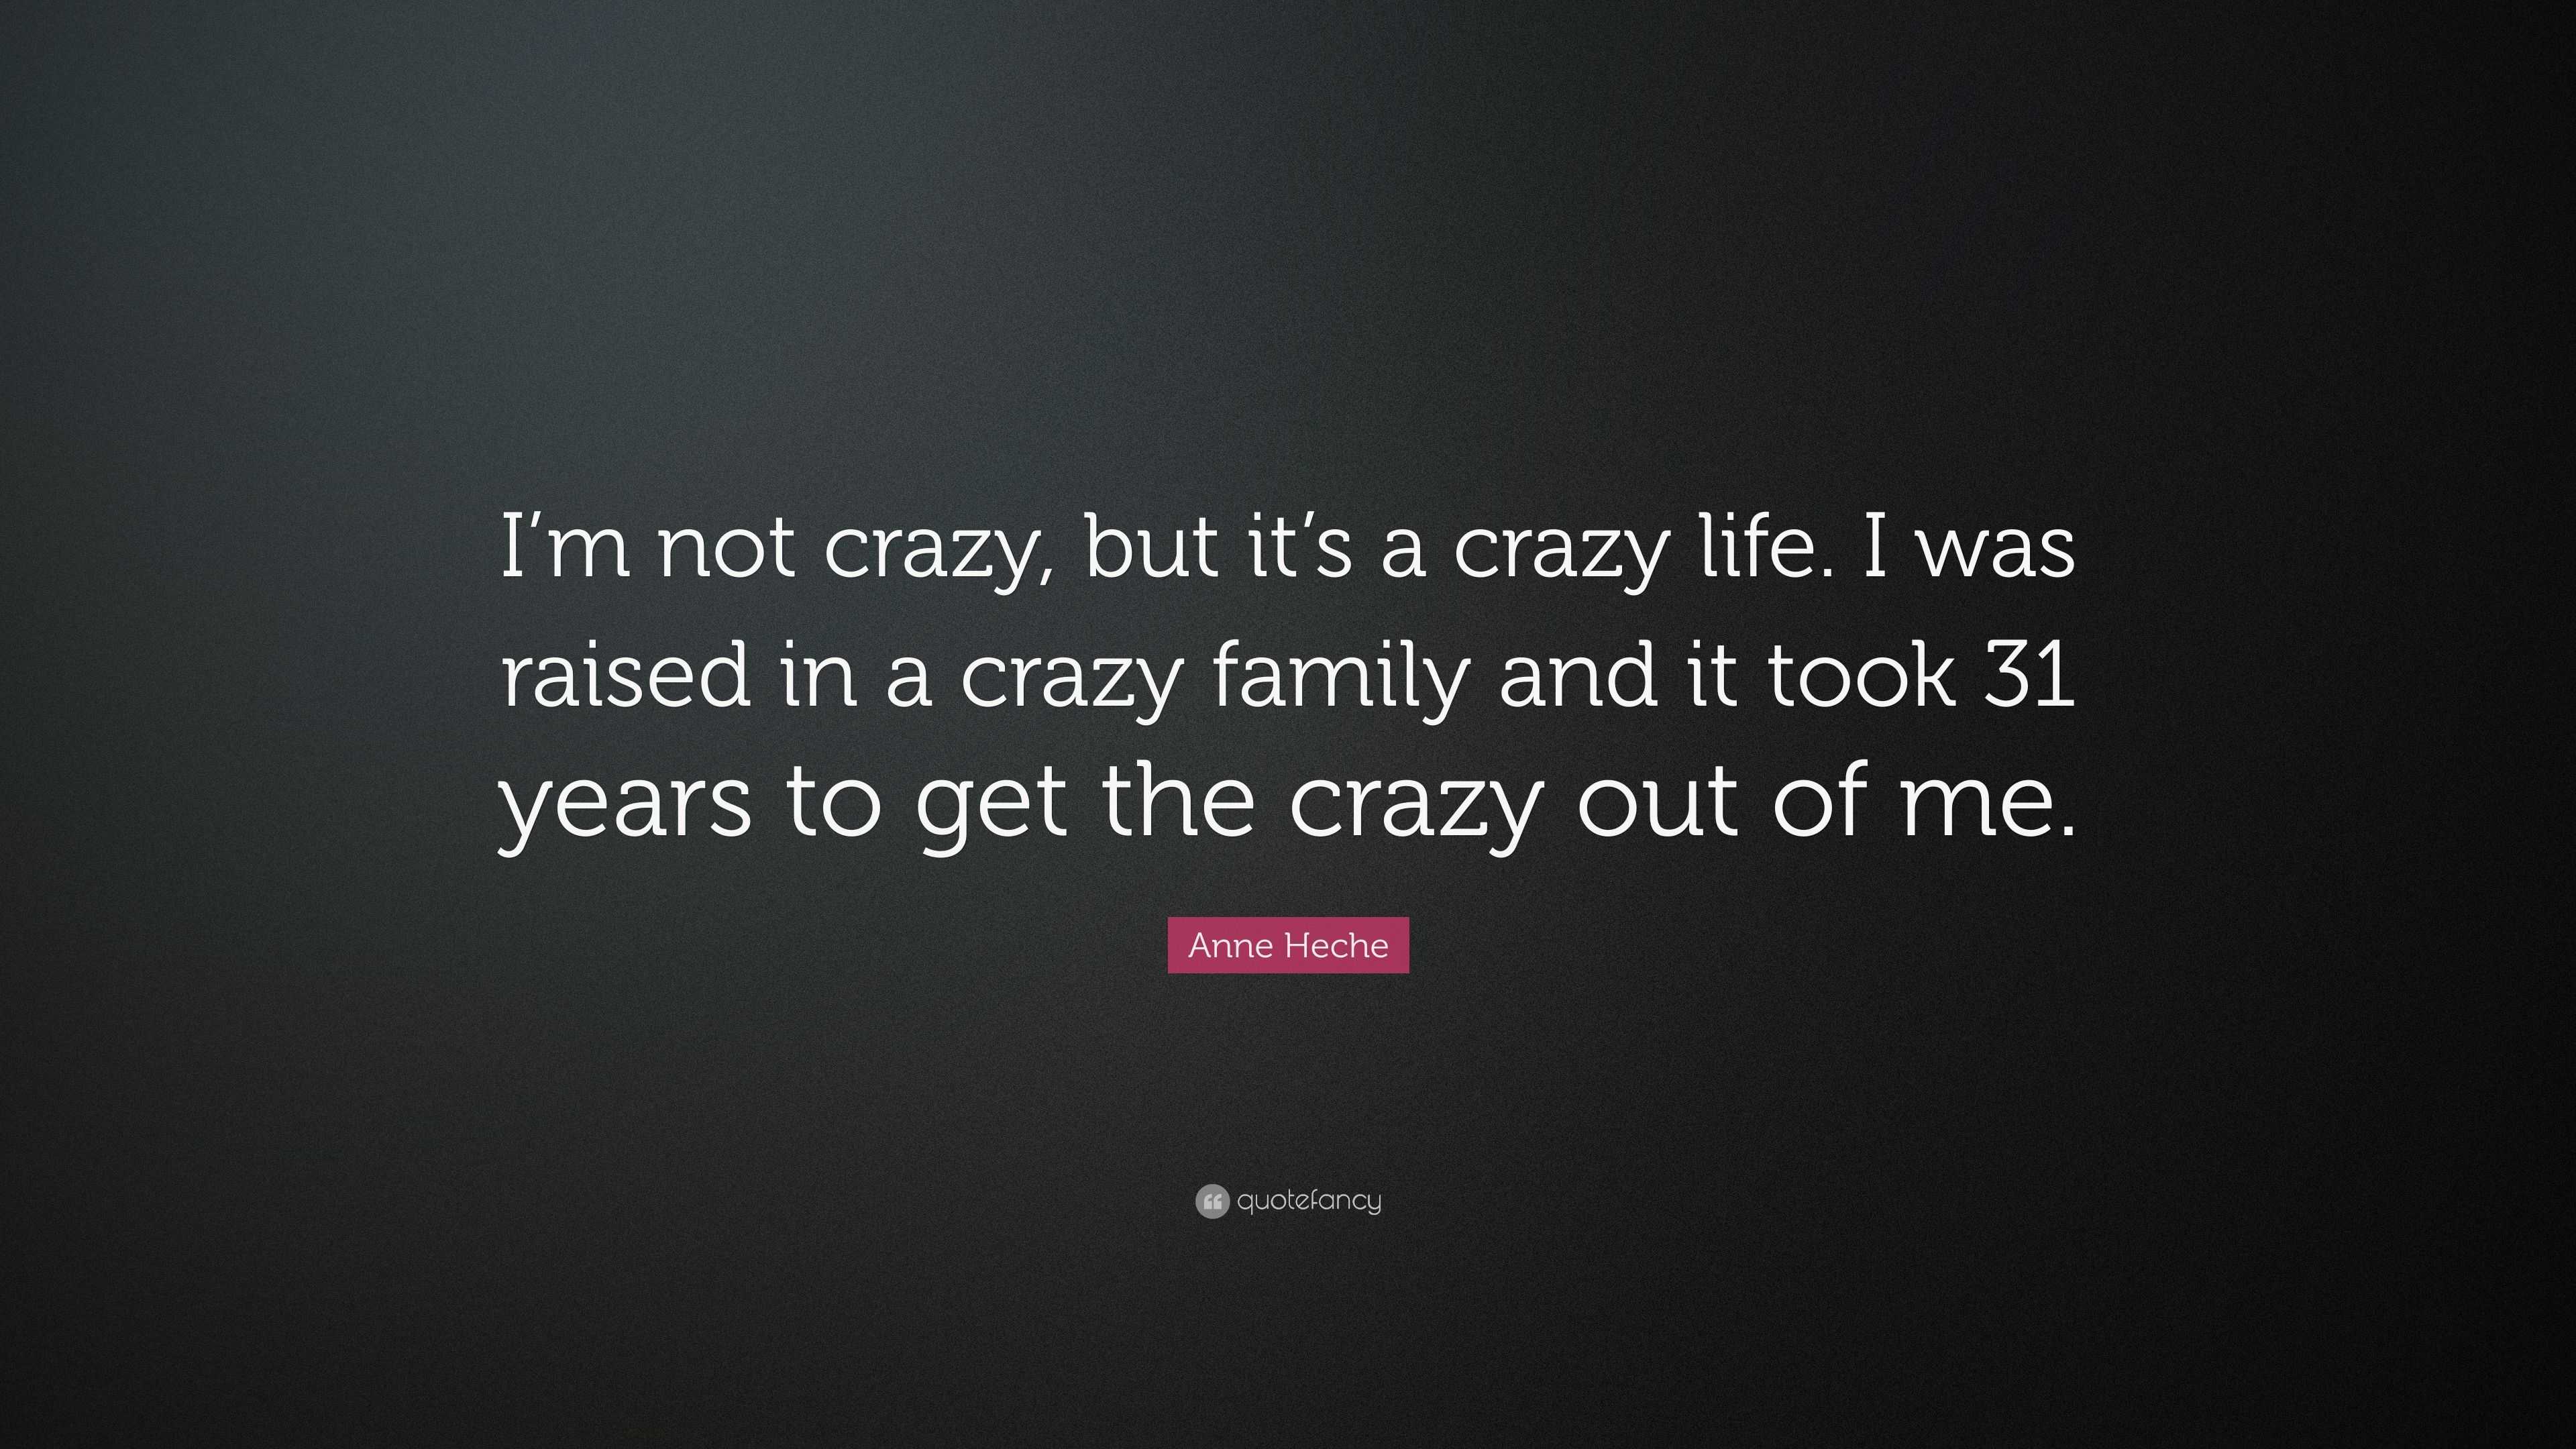 Anne Heche Quote “im Not Crazy But Its A Crazy Life I Was Raised